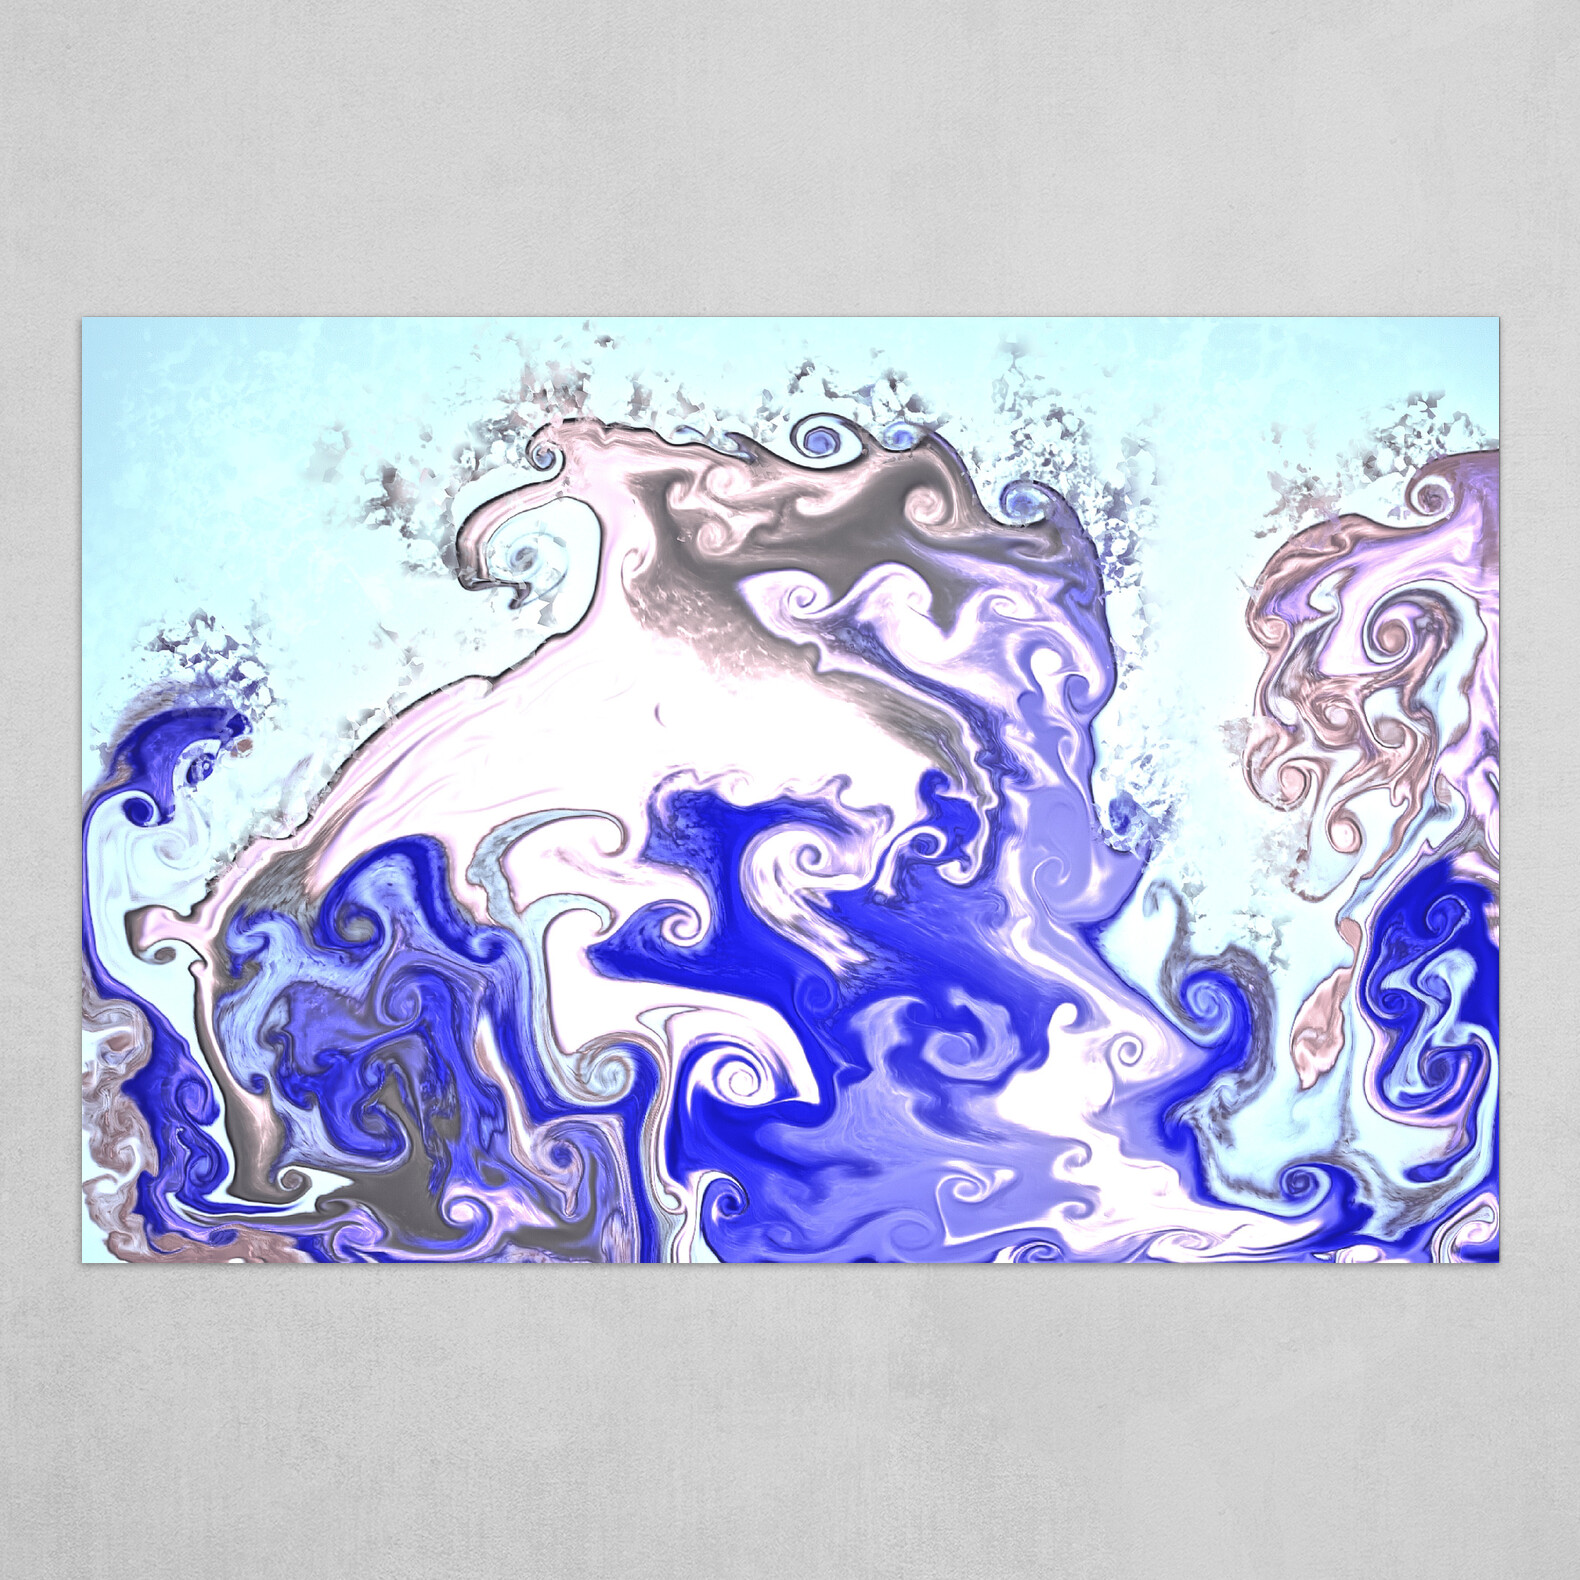 Purple and light blue fluid pour abstract art 5